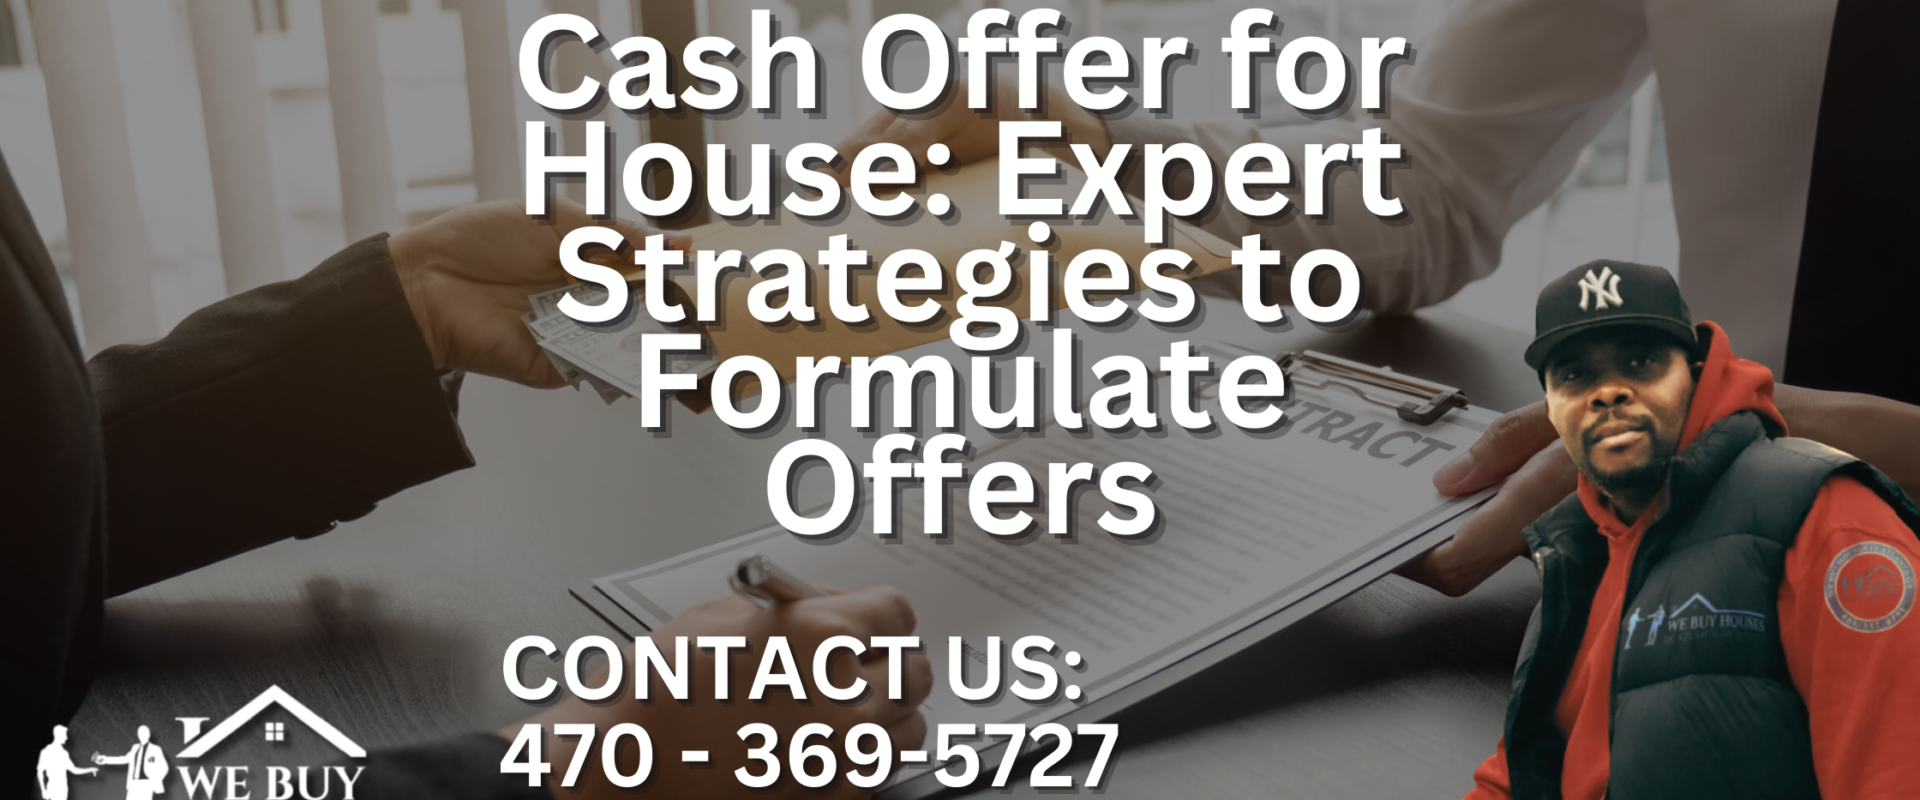 Cash Offer for House: Expert Strategies to Formulate Offers